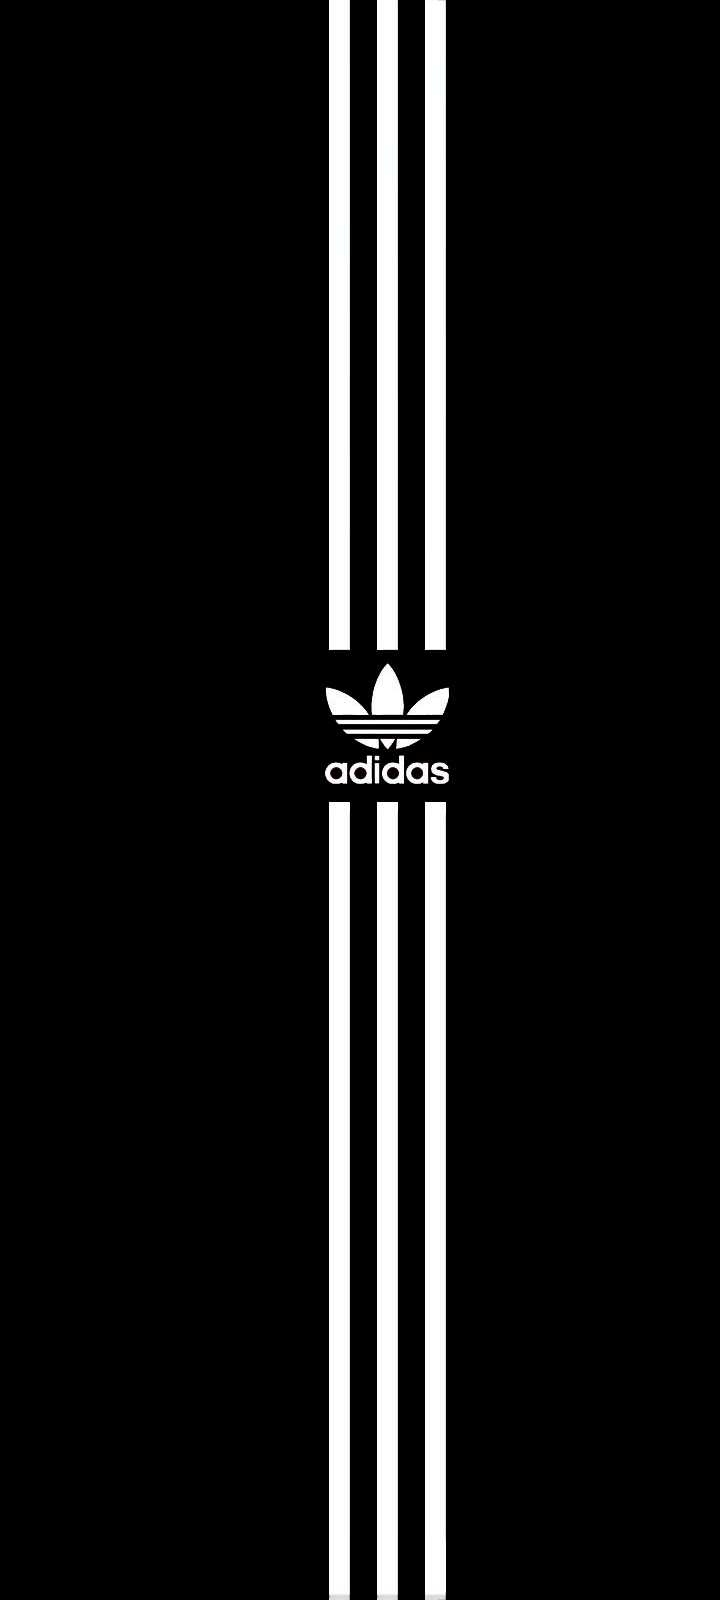 adidas, products, product, sport Full HD